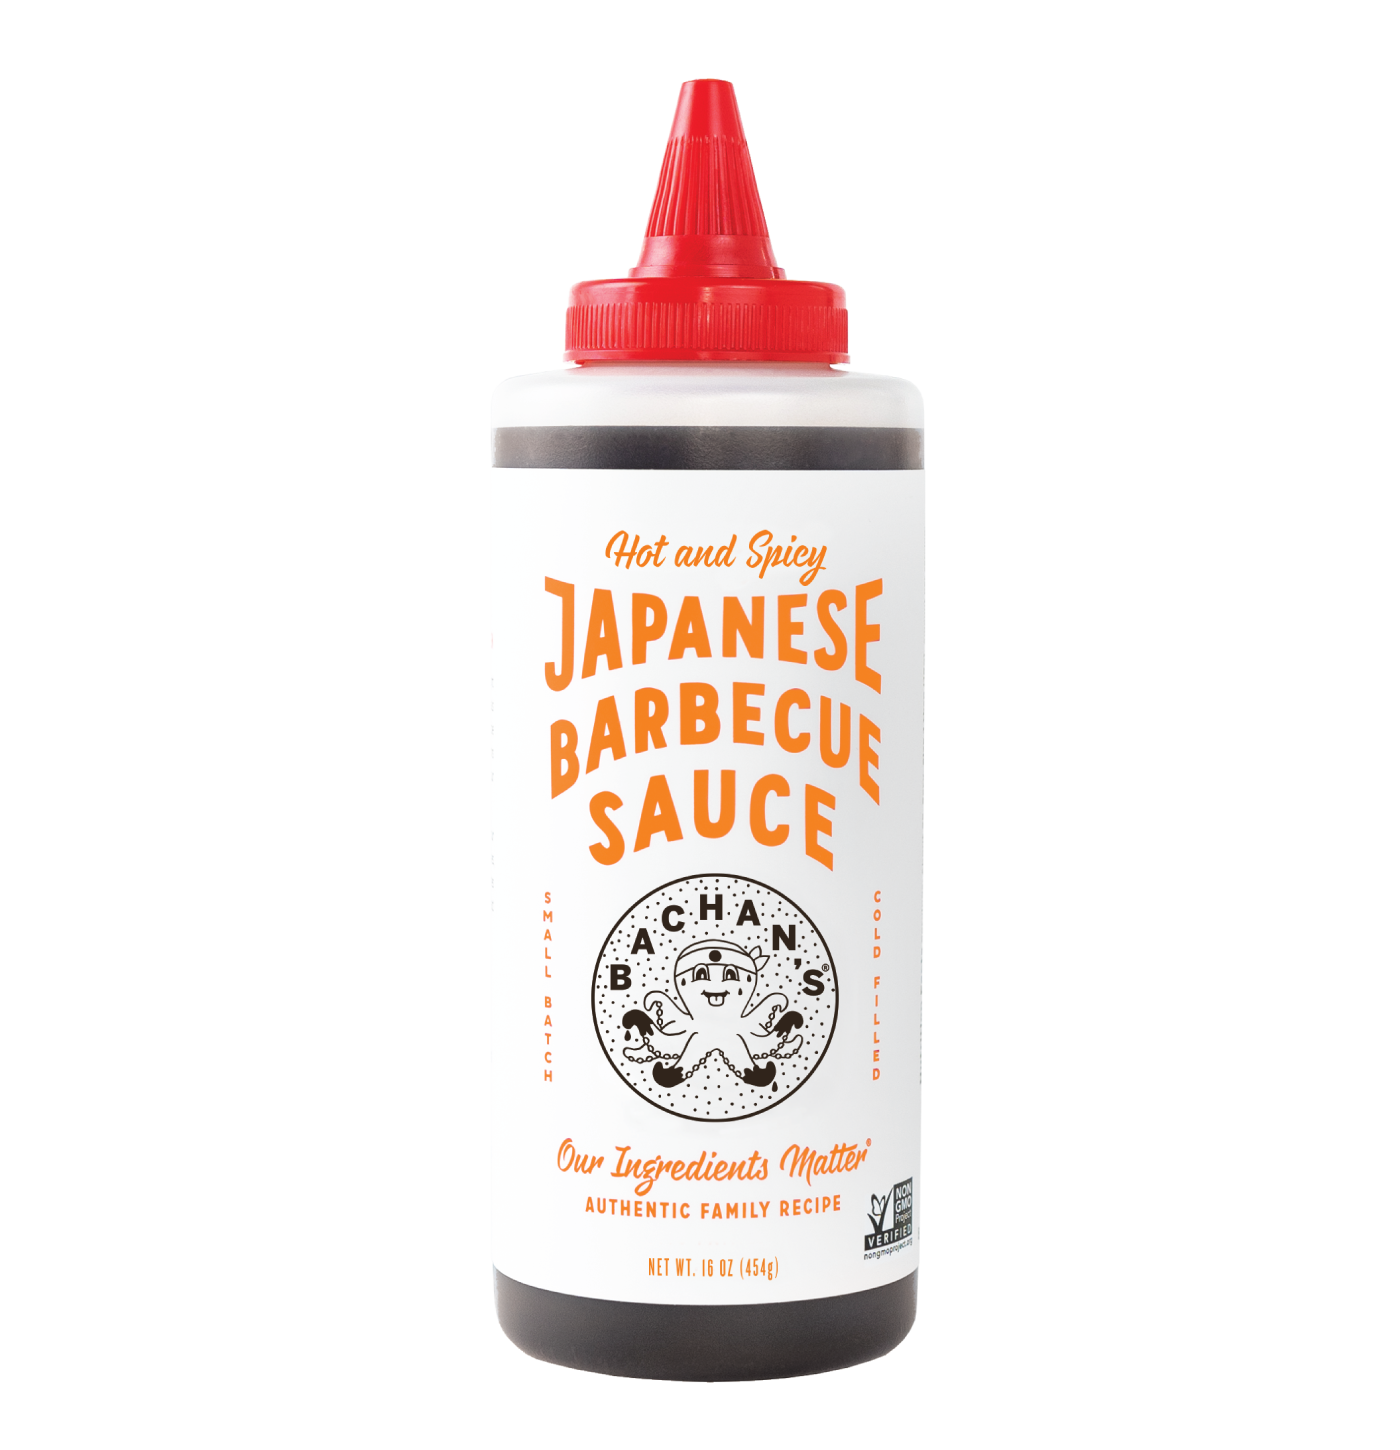 Bachan's - Hot and Spicy Japanese Barbecue Sauce